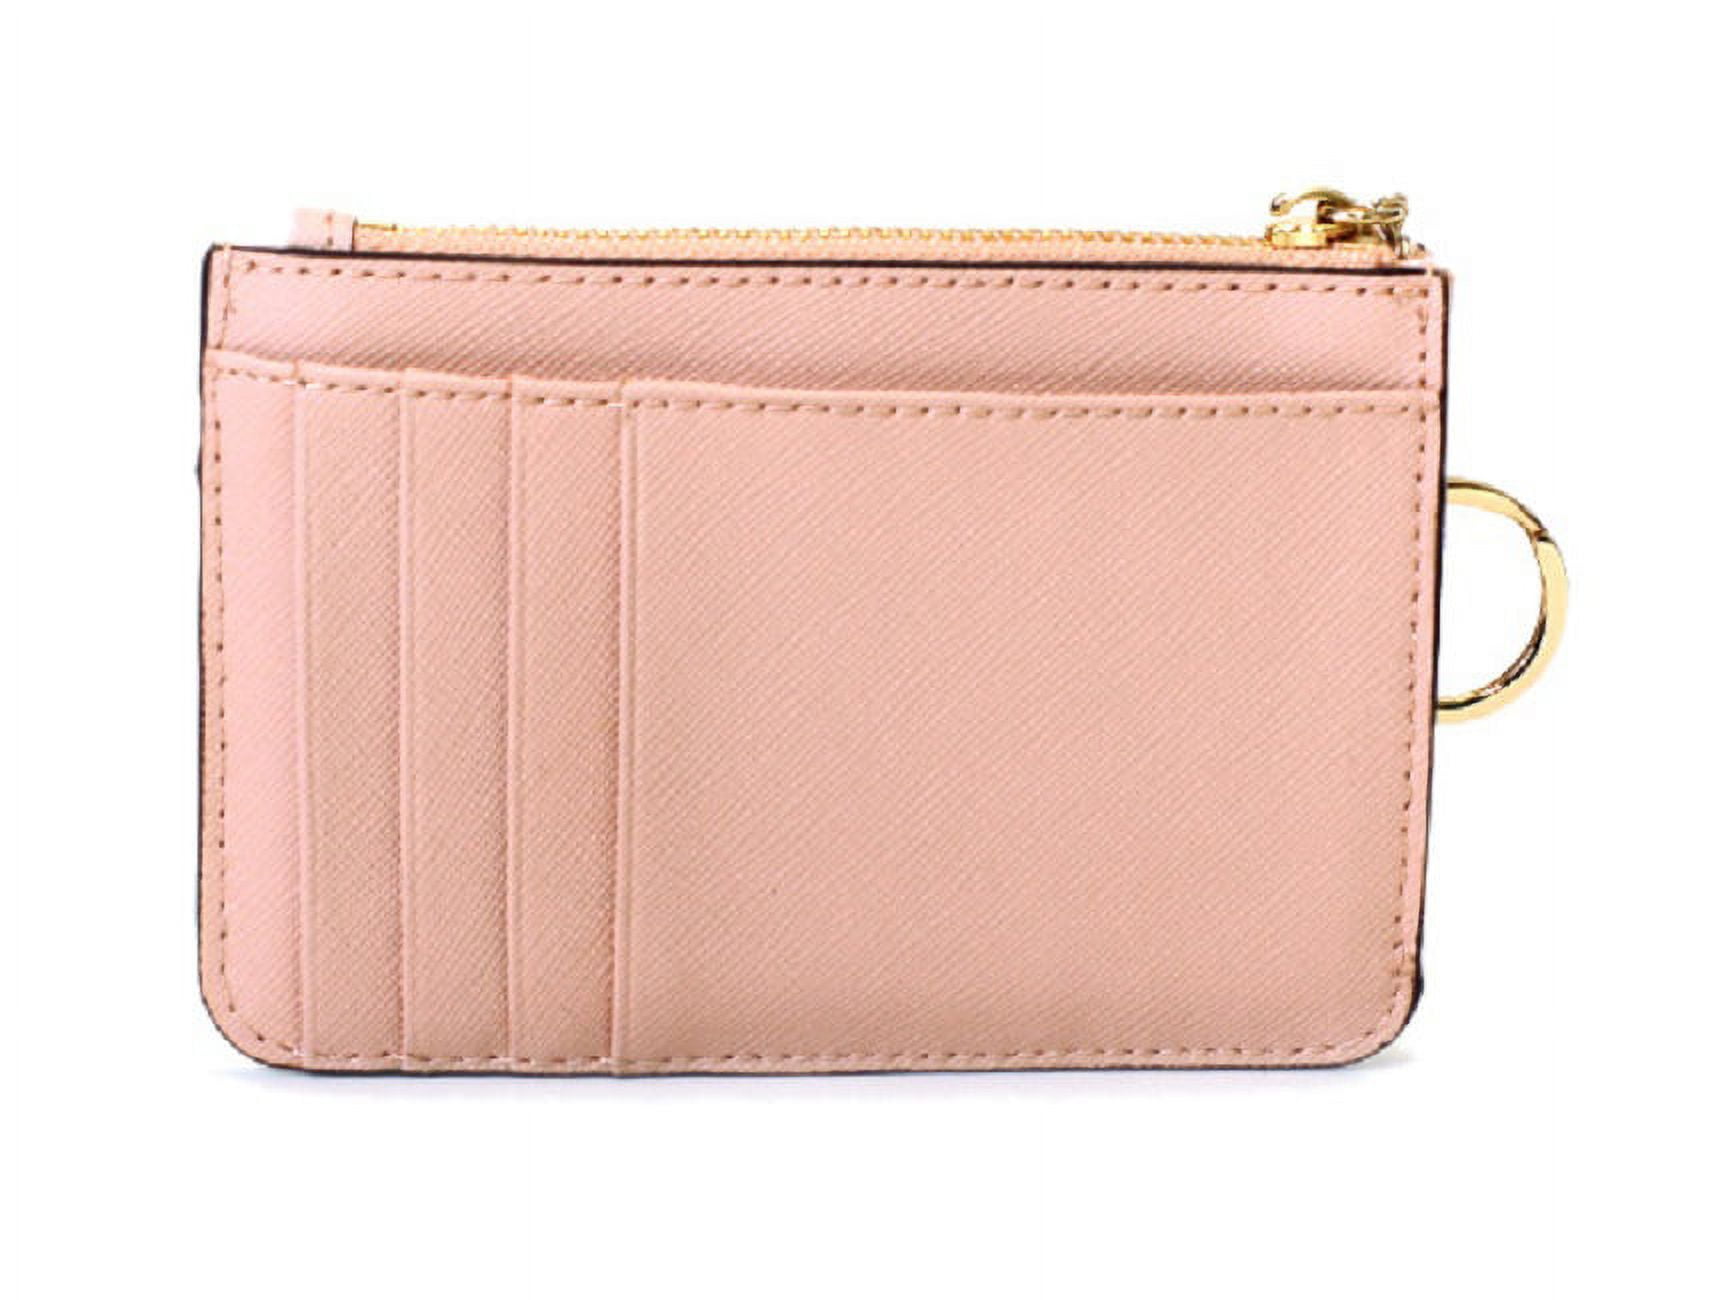 Kate Spade laurel way bitsy Card Case Coin Purse Key Fob Pouch Wallet ~NWT~  Pink